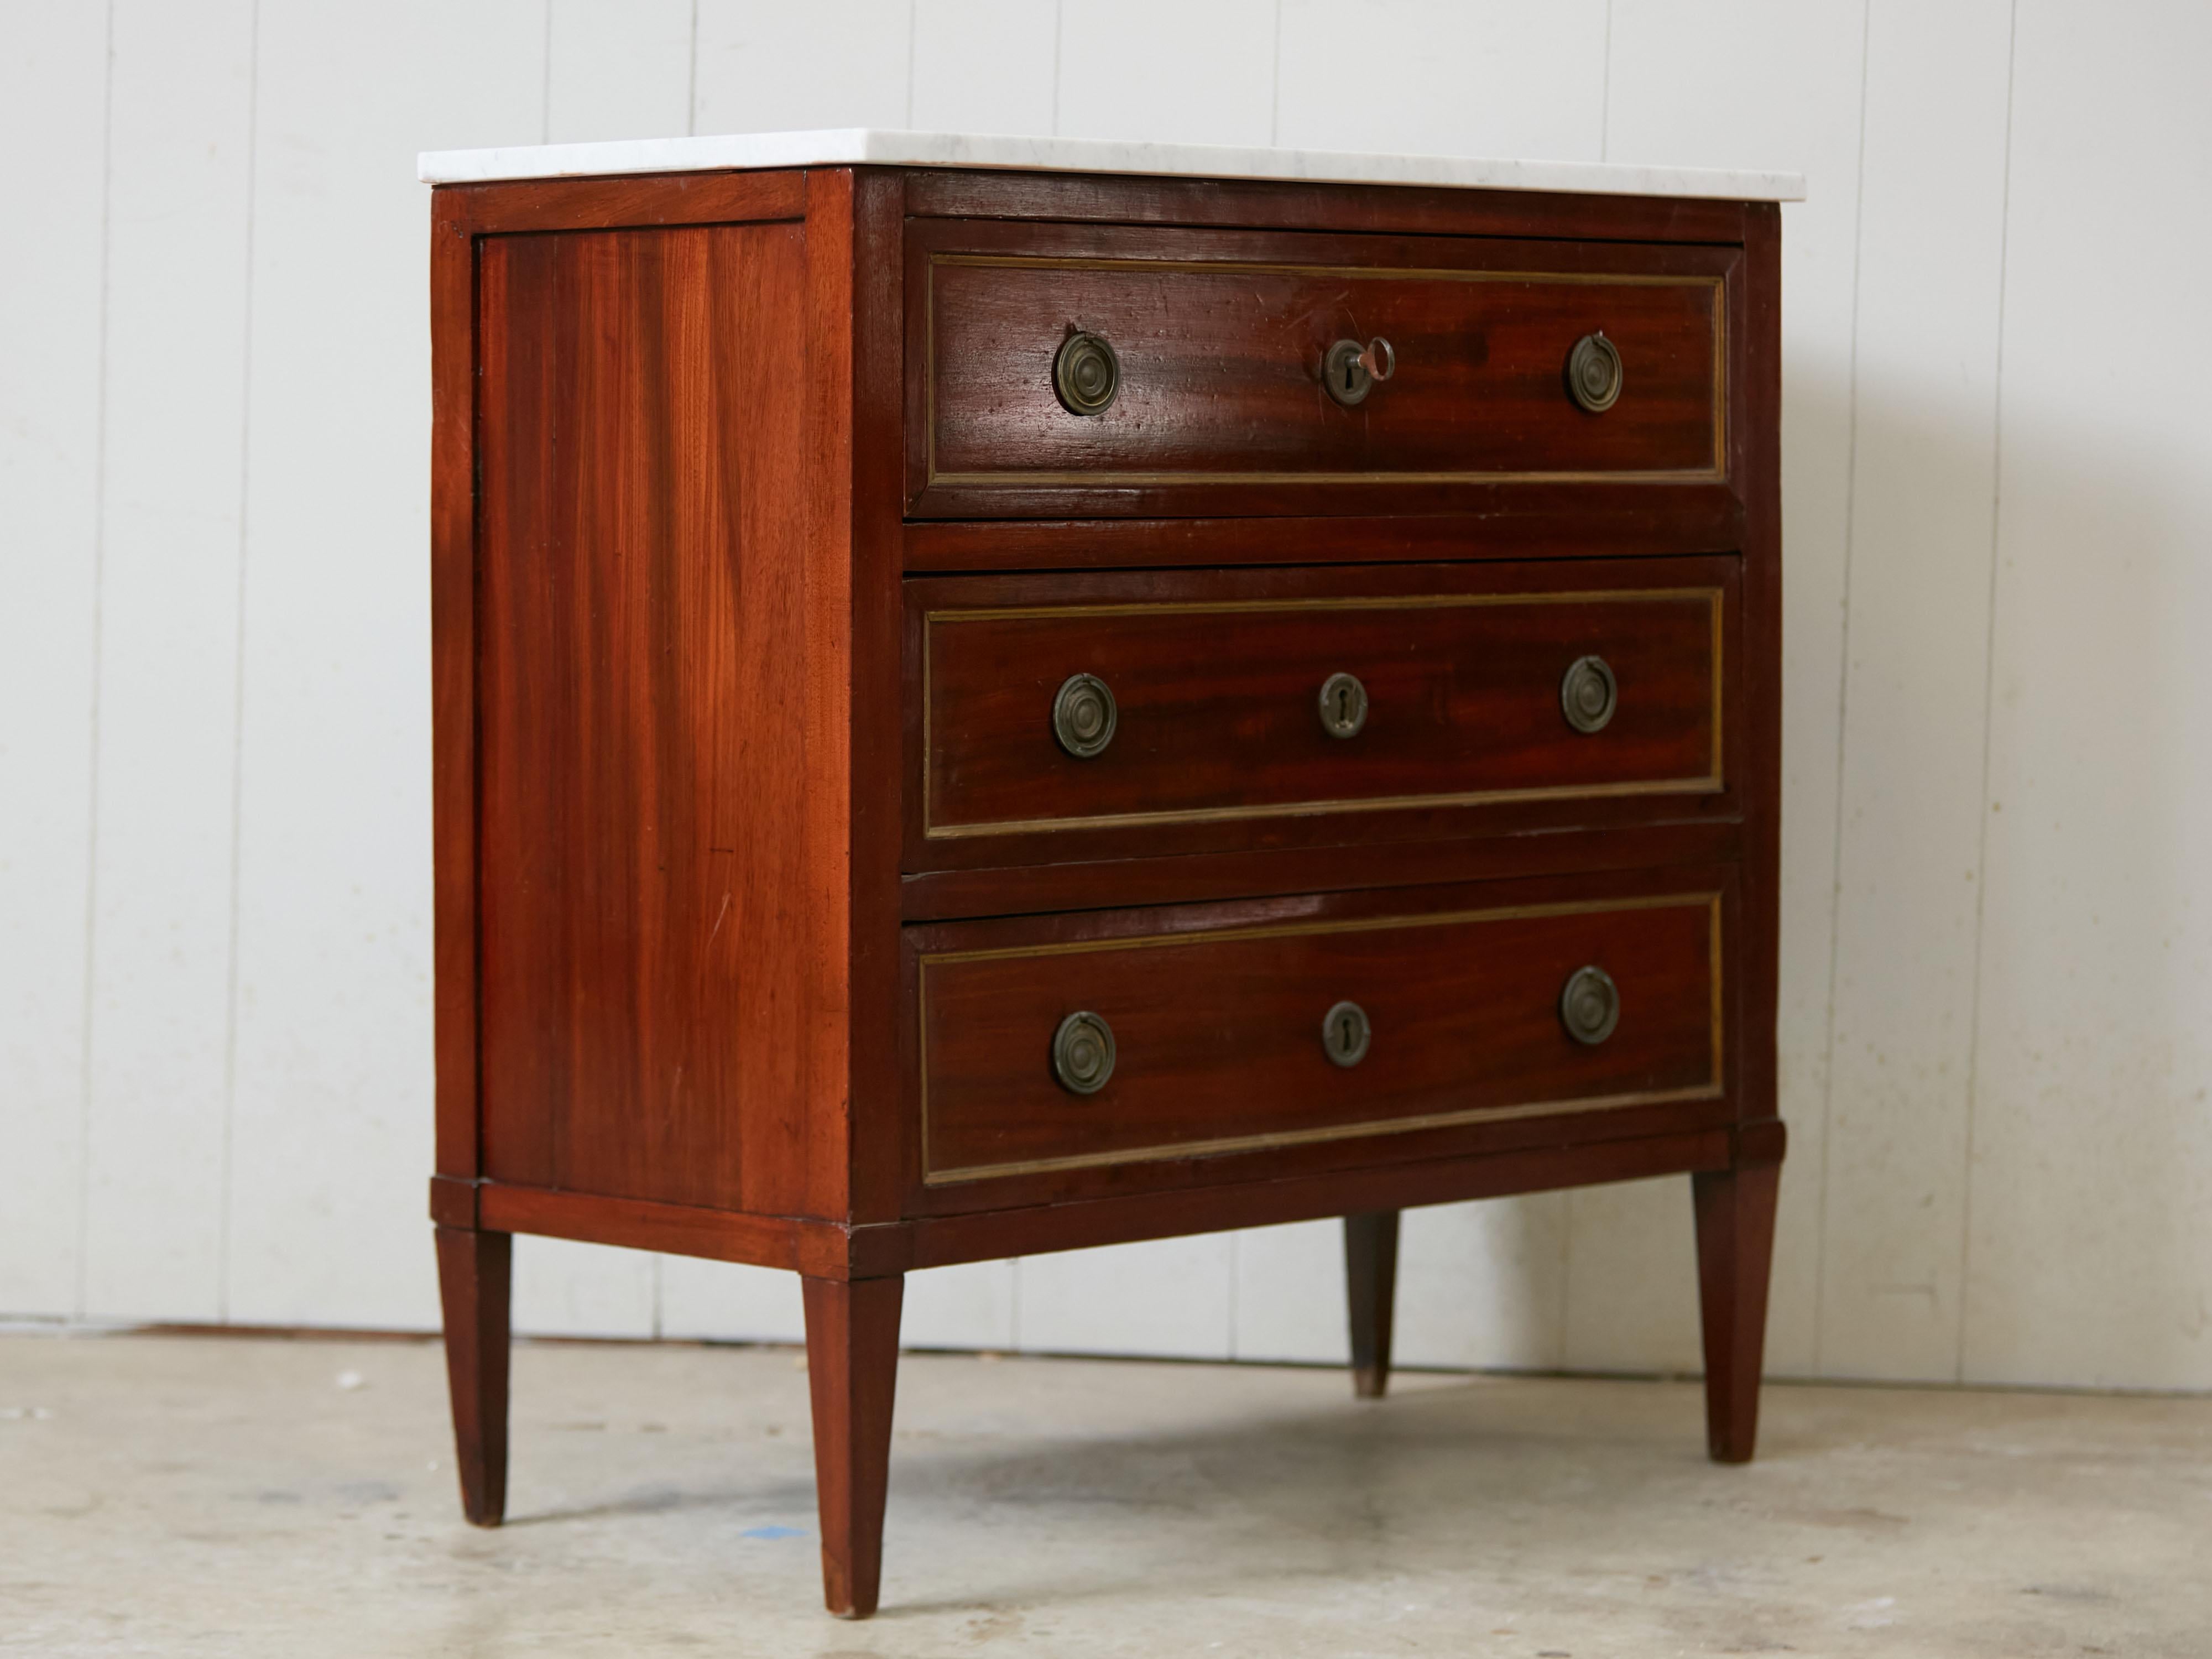 French Empire Style 1870s Mahogany Three-Drawer Commode with White Marble Top  For Sale 6